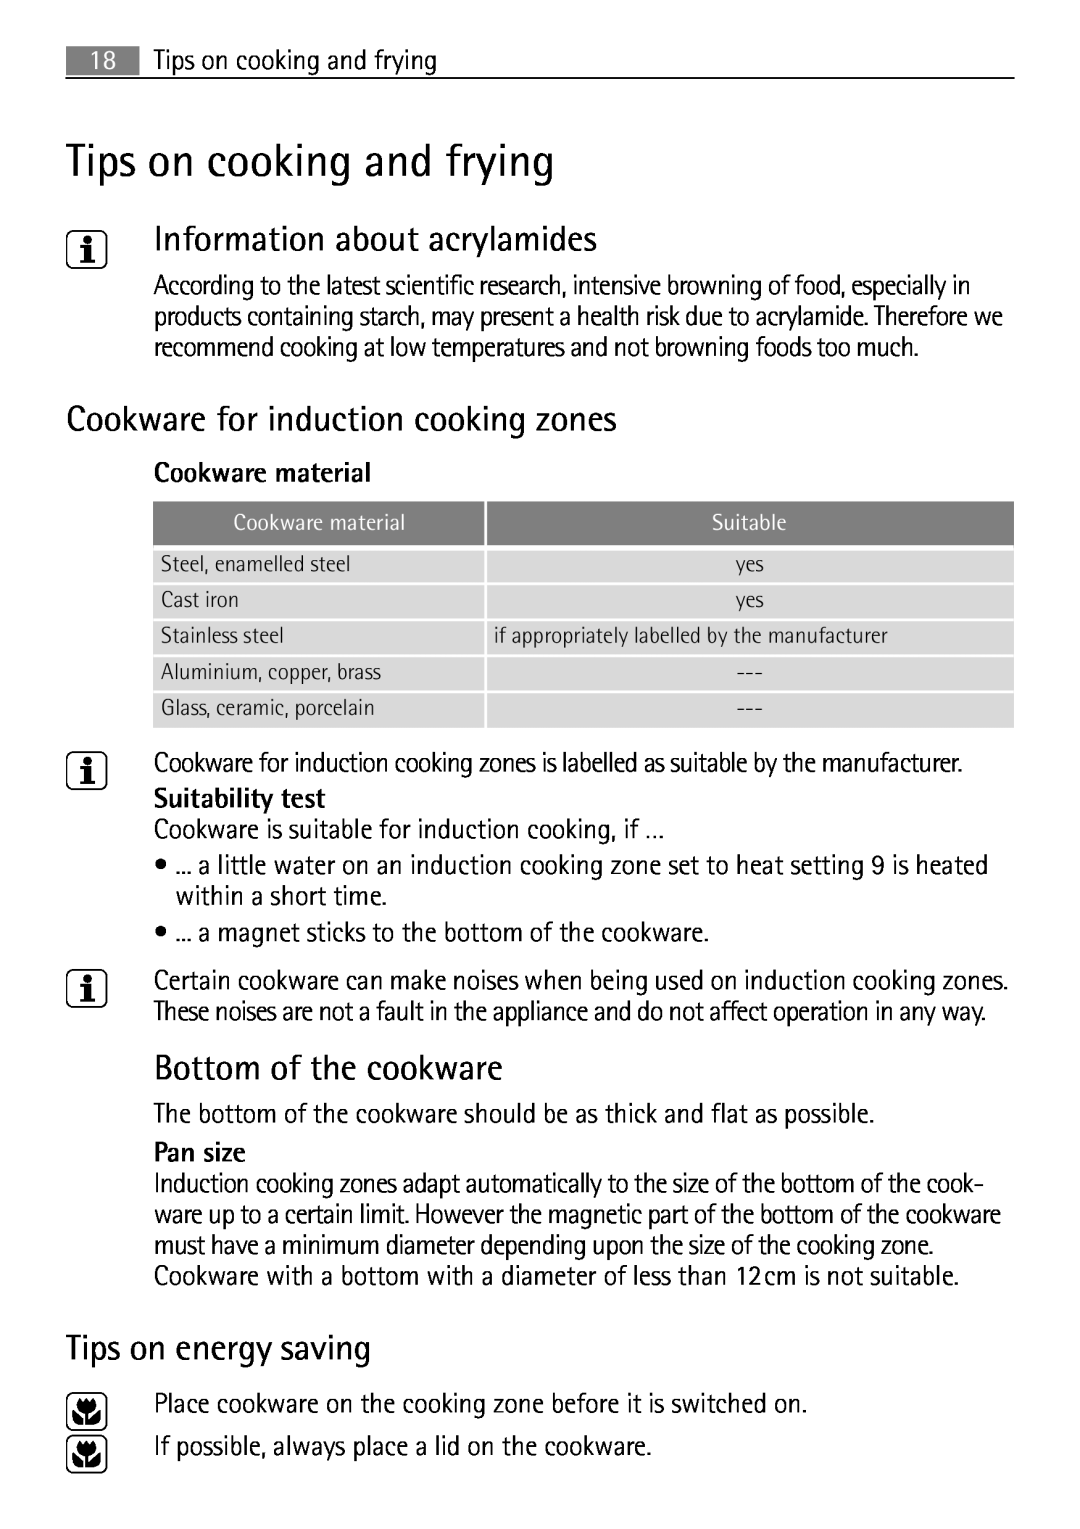 Electrolux 98001 KF SN Tips on cooking and frying, Information about acrylamides, Cookware for induction cooking zones 